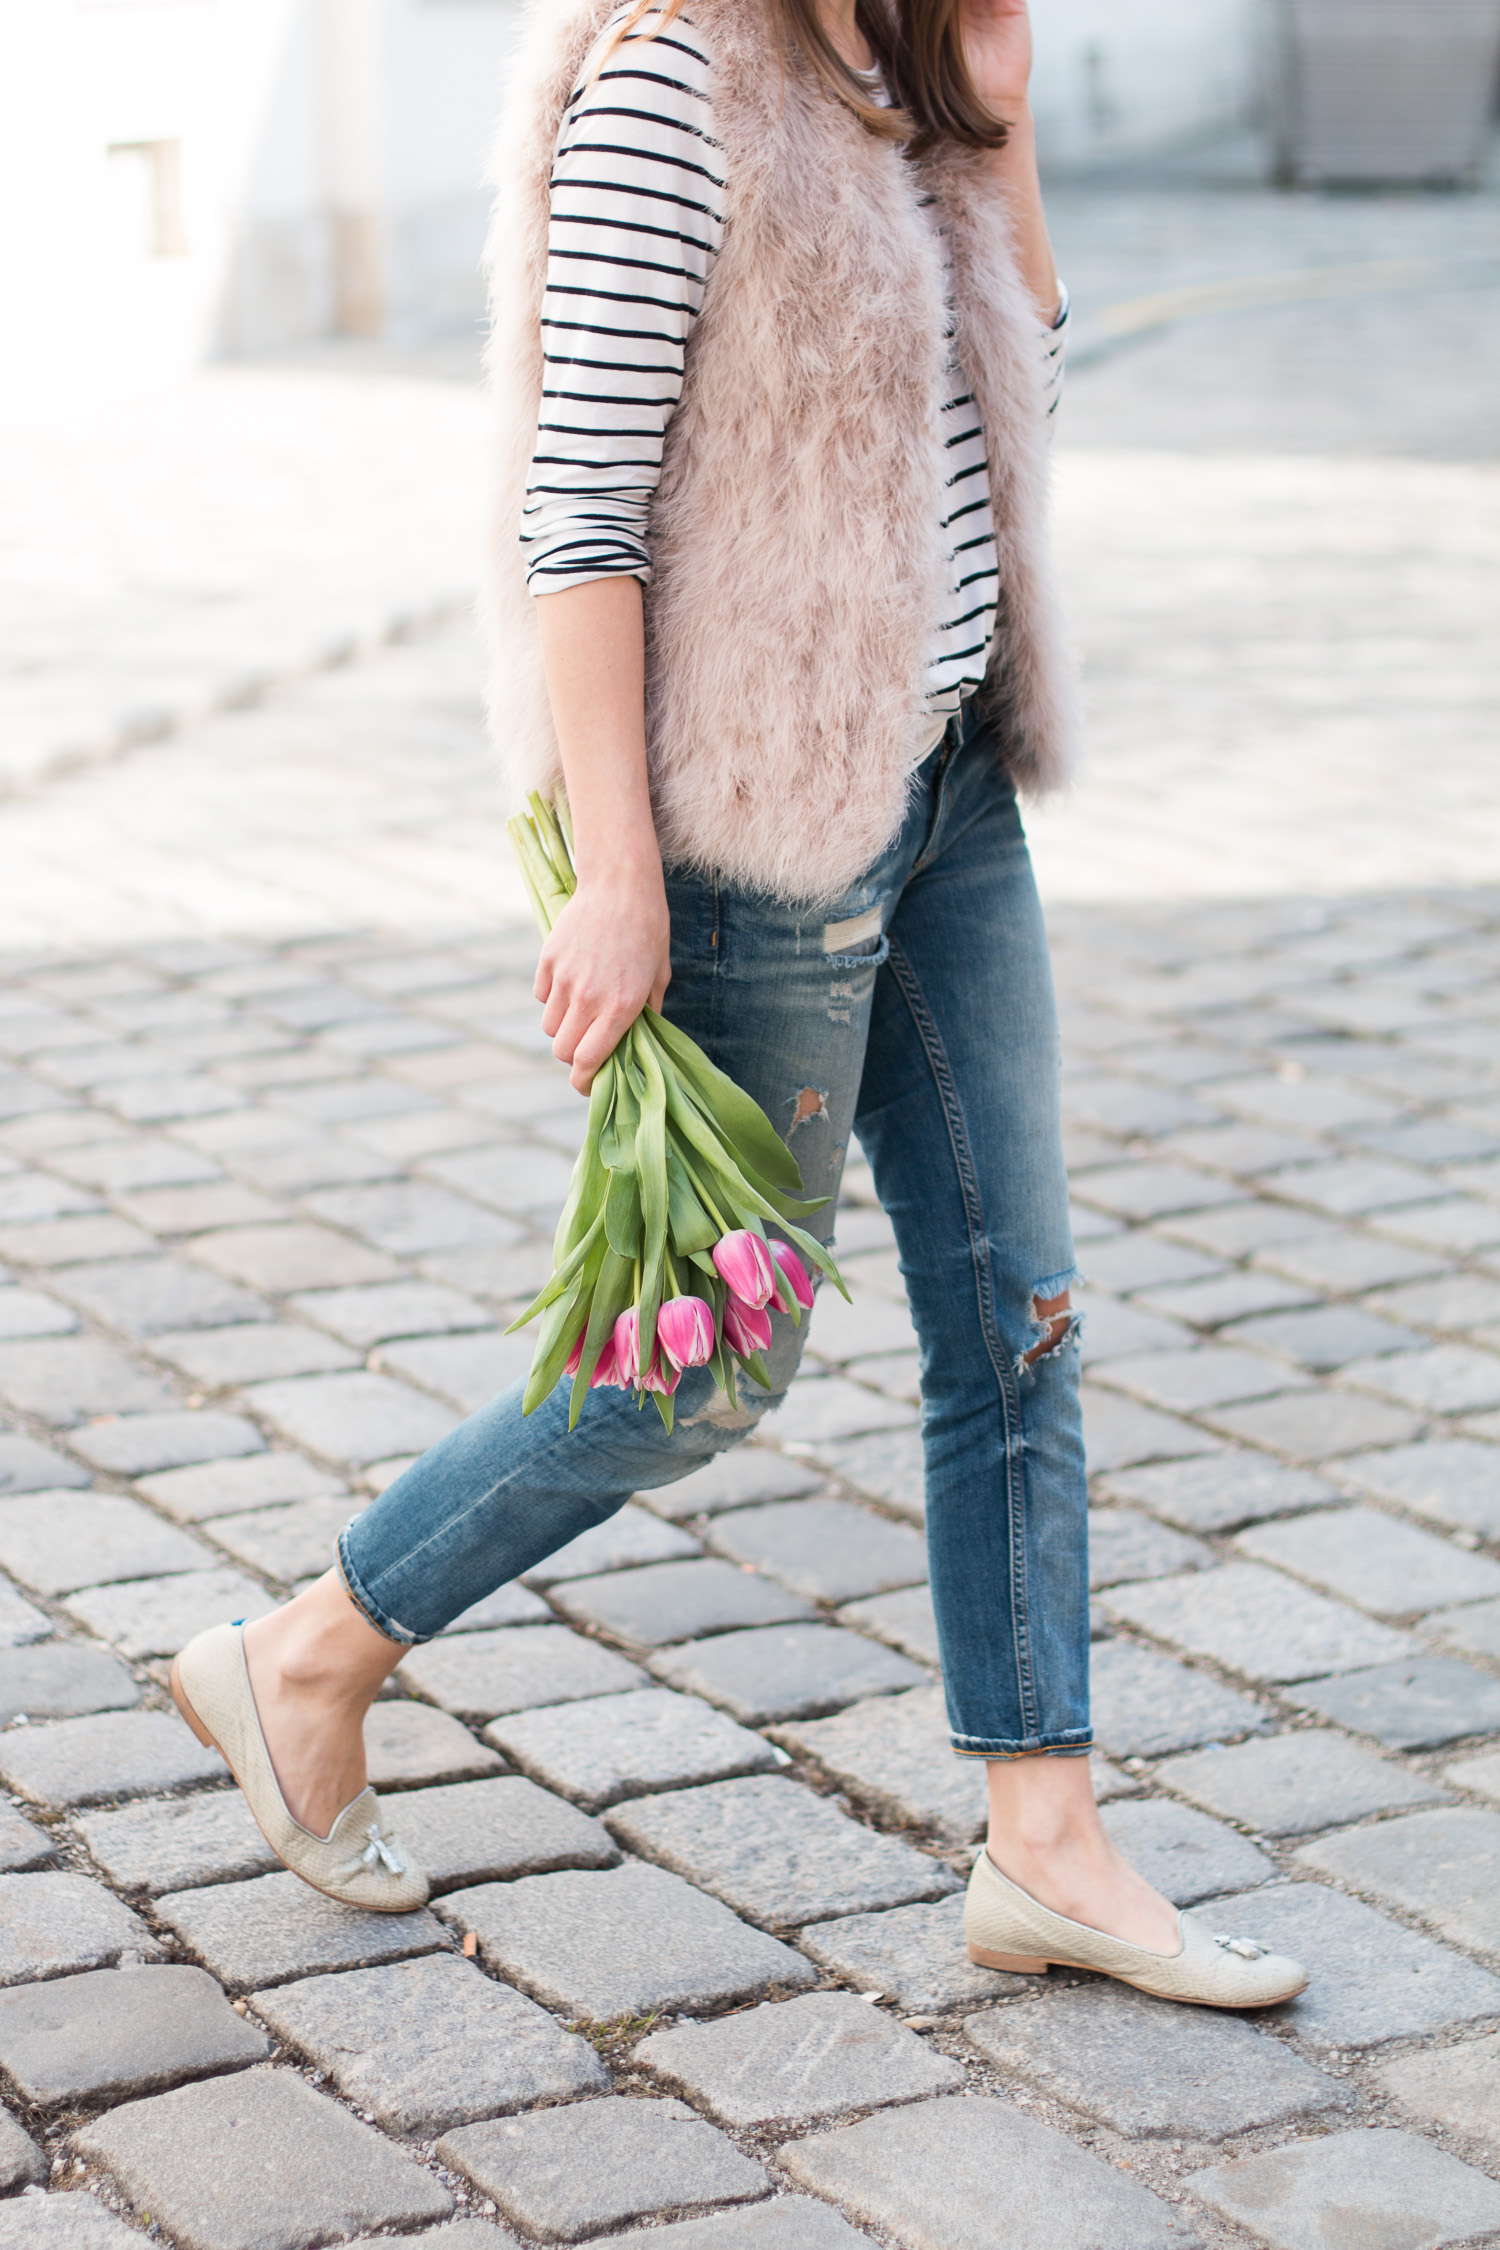 Spring Feelings mit Lindt Animal Print | The Daily Dose